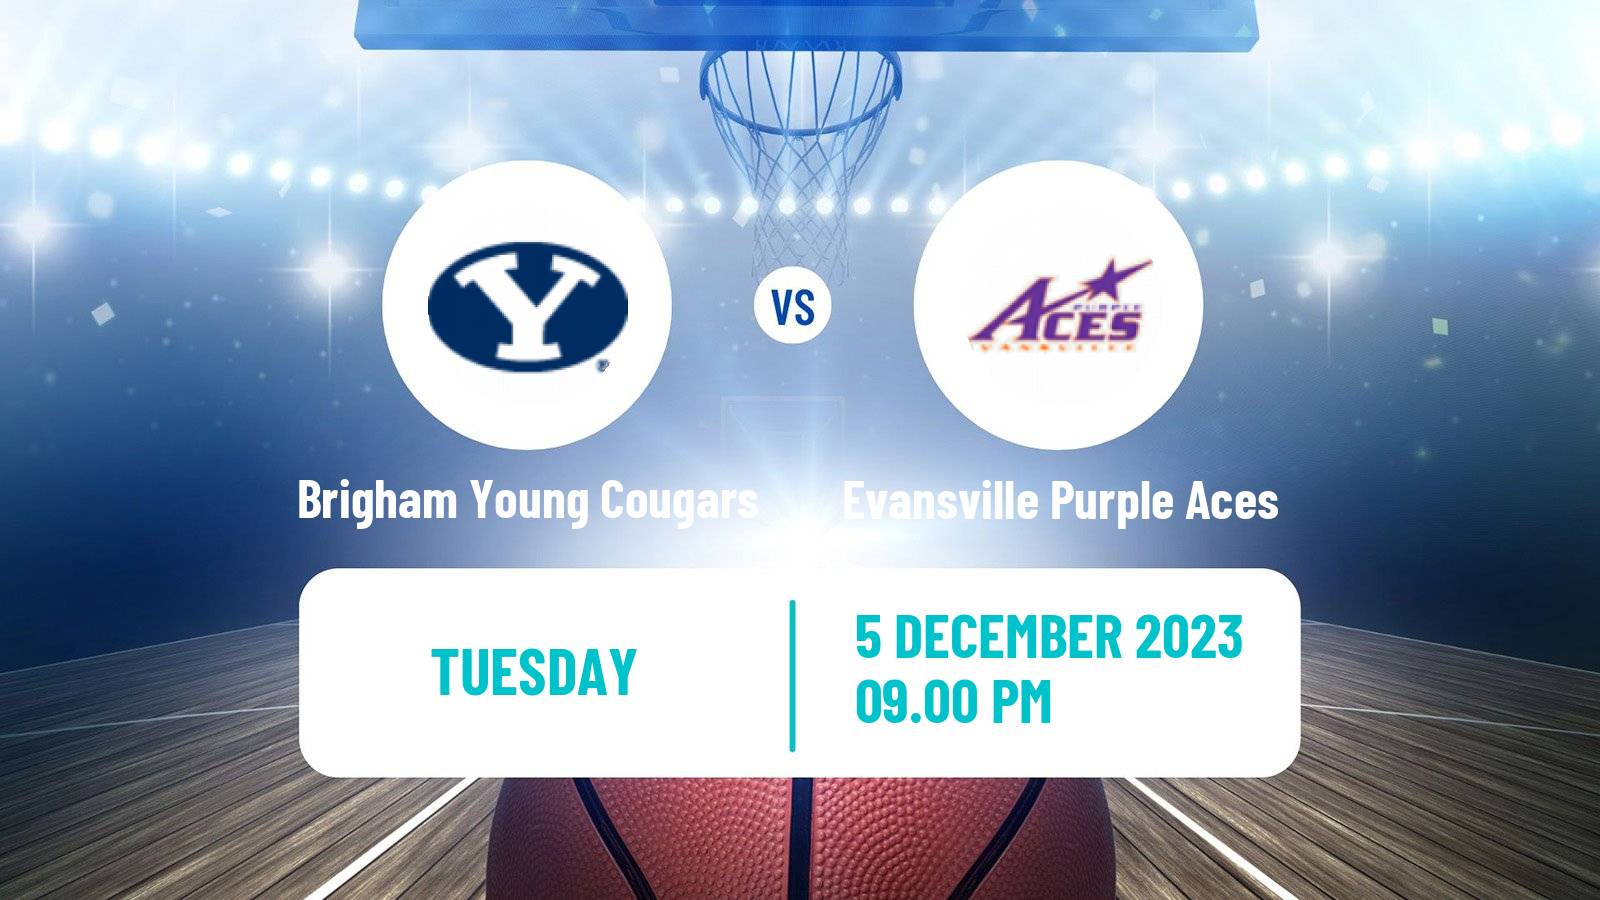 Basketball NCAA College Basketball Brigham Young Cougars - Evansville Purple Aces